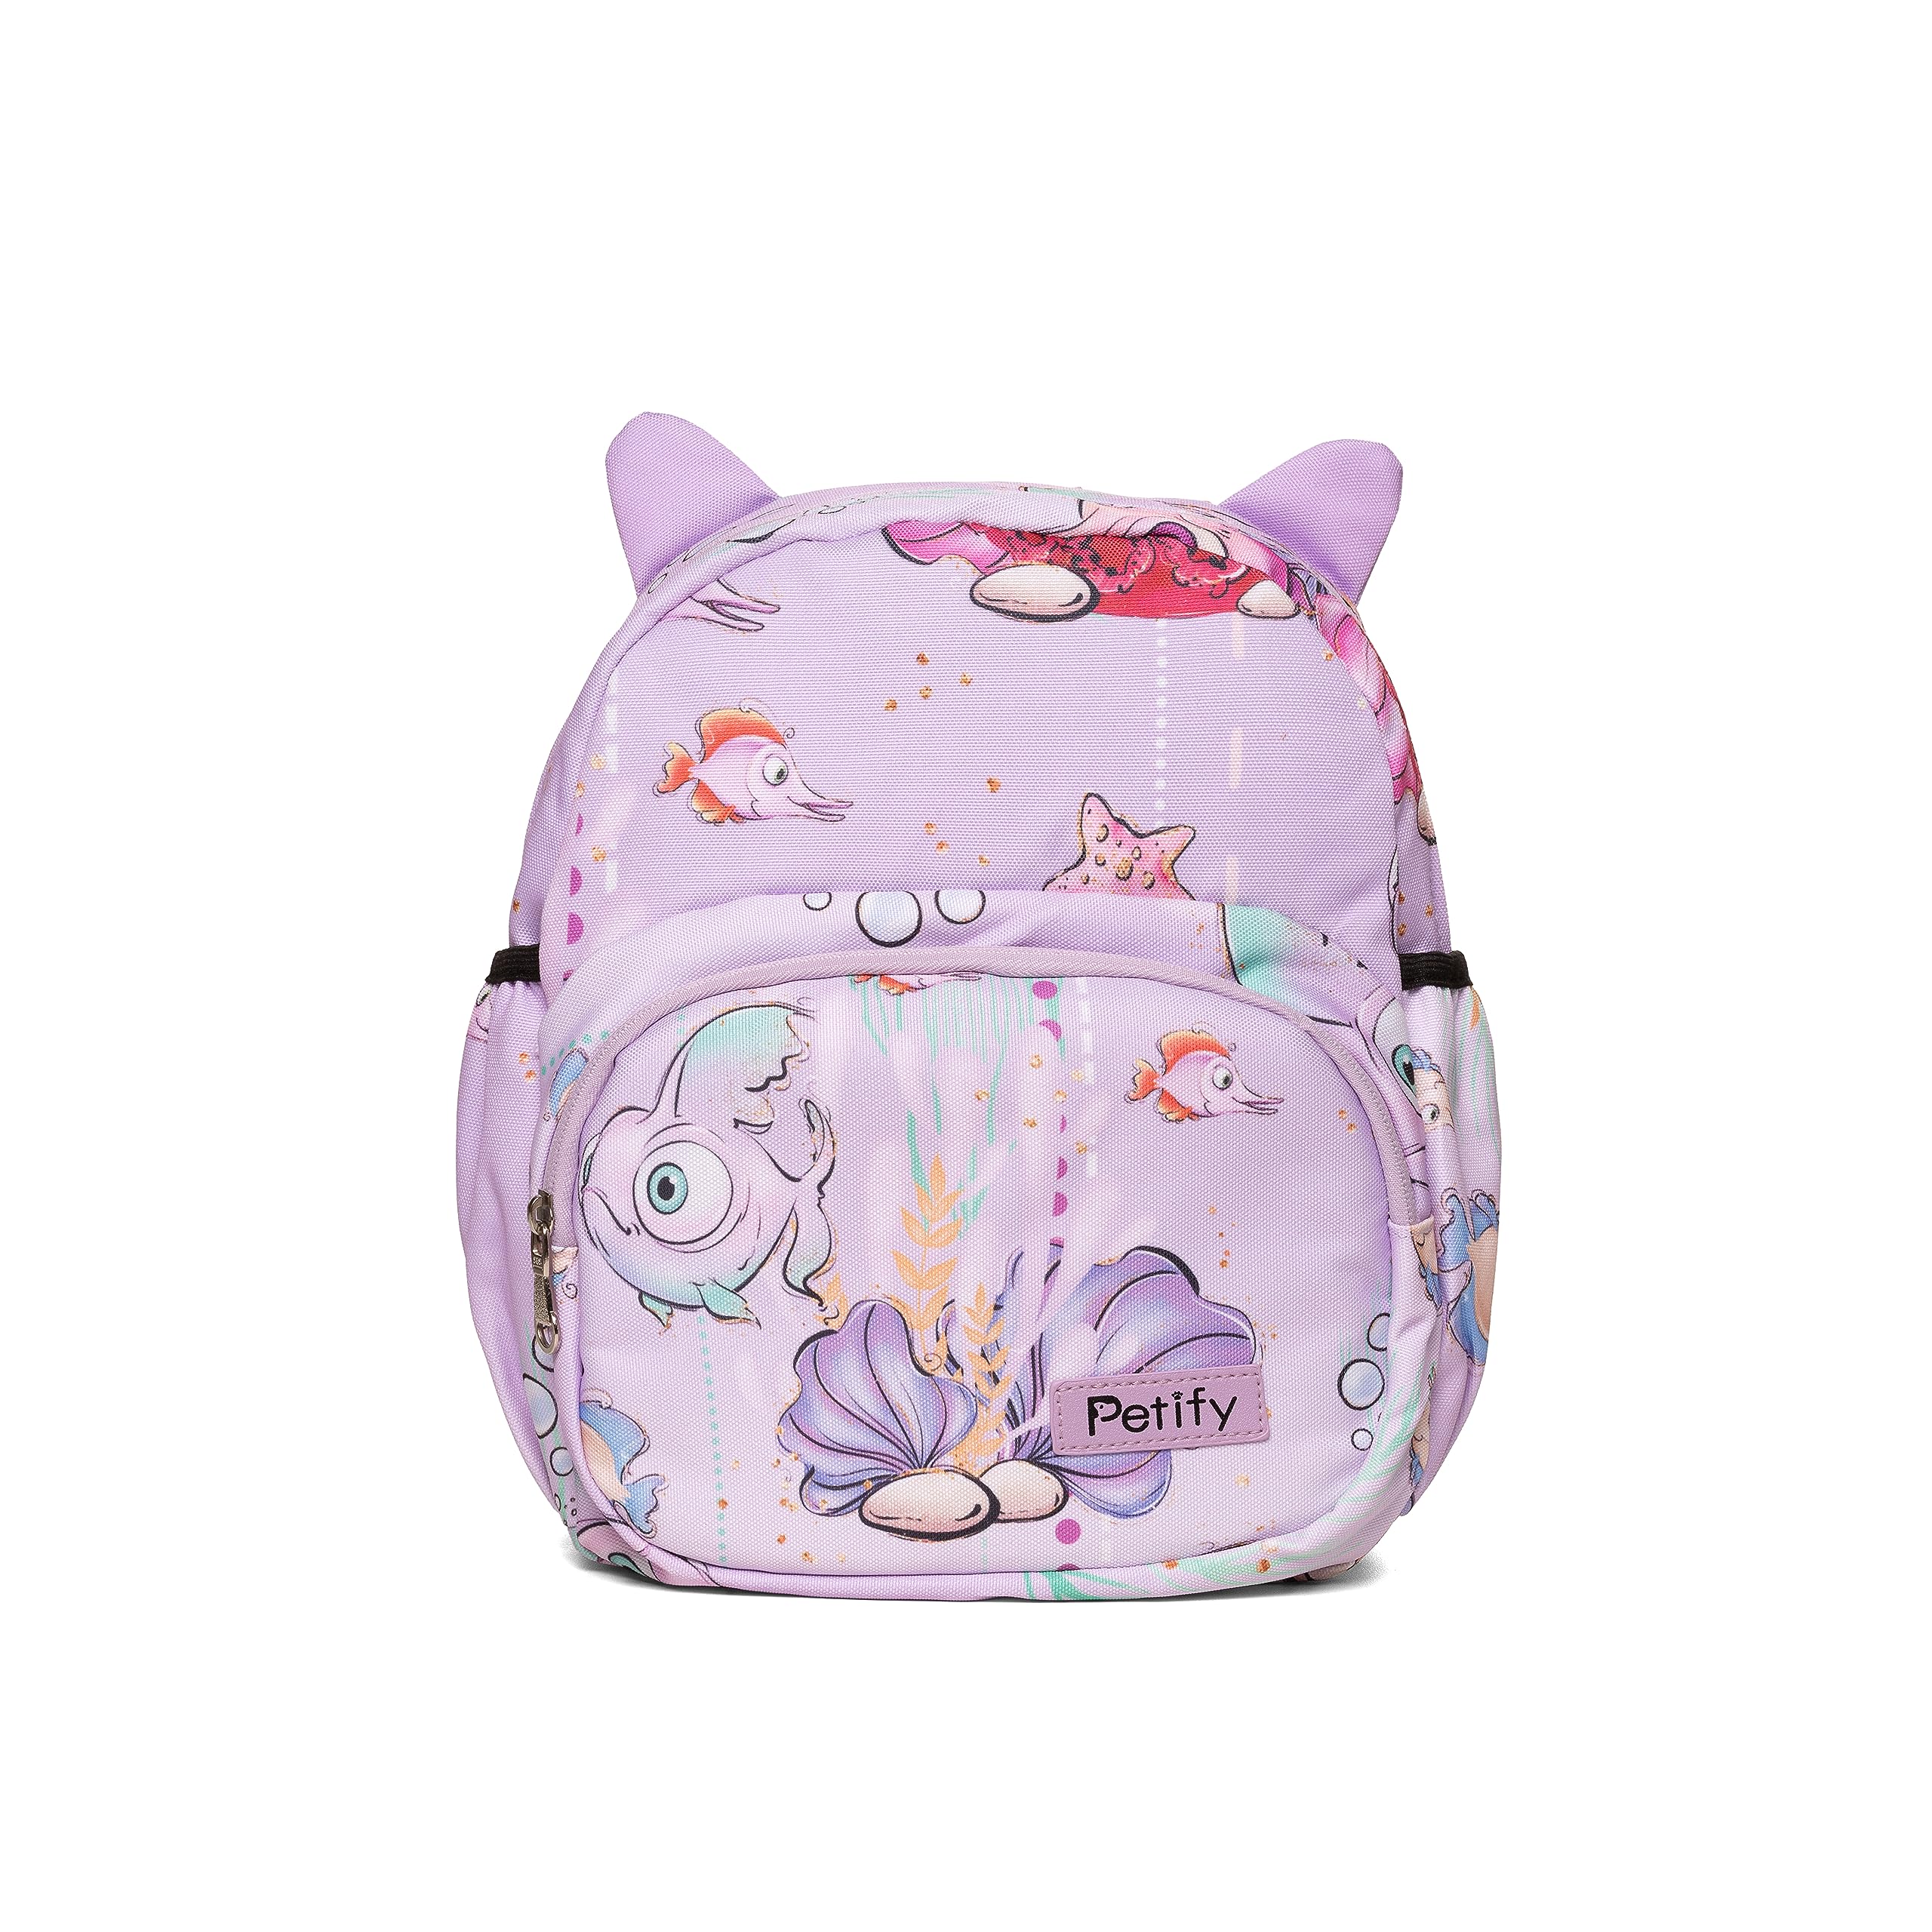 BQCLAB Cute Cartoon Mini Kids Backpack - 12-Inch Adventure for Toddler Boys Girls, Perfect for School & Play, Padded Straps (Seaworld)